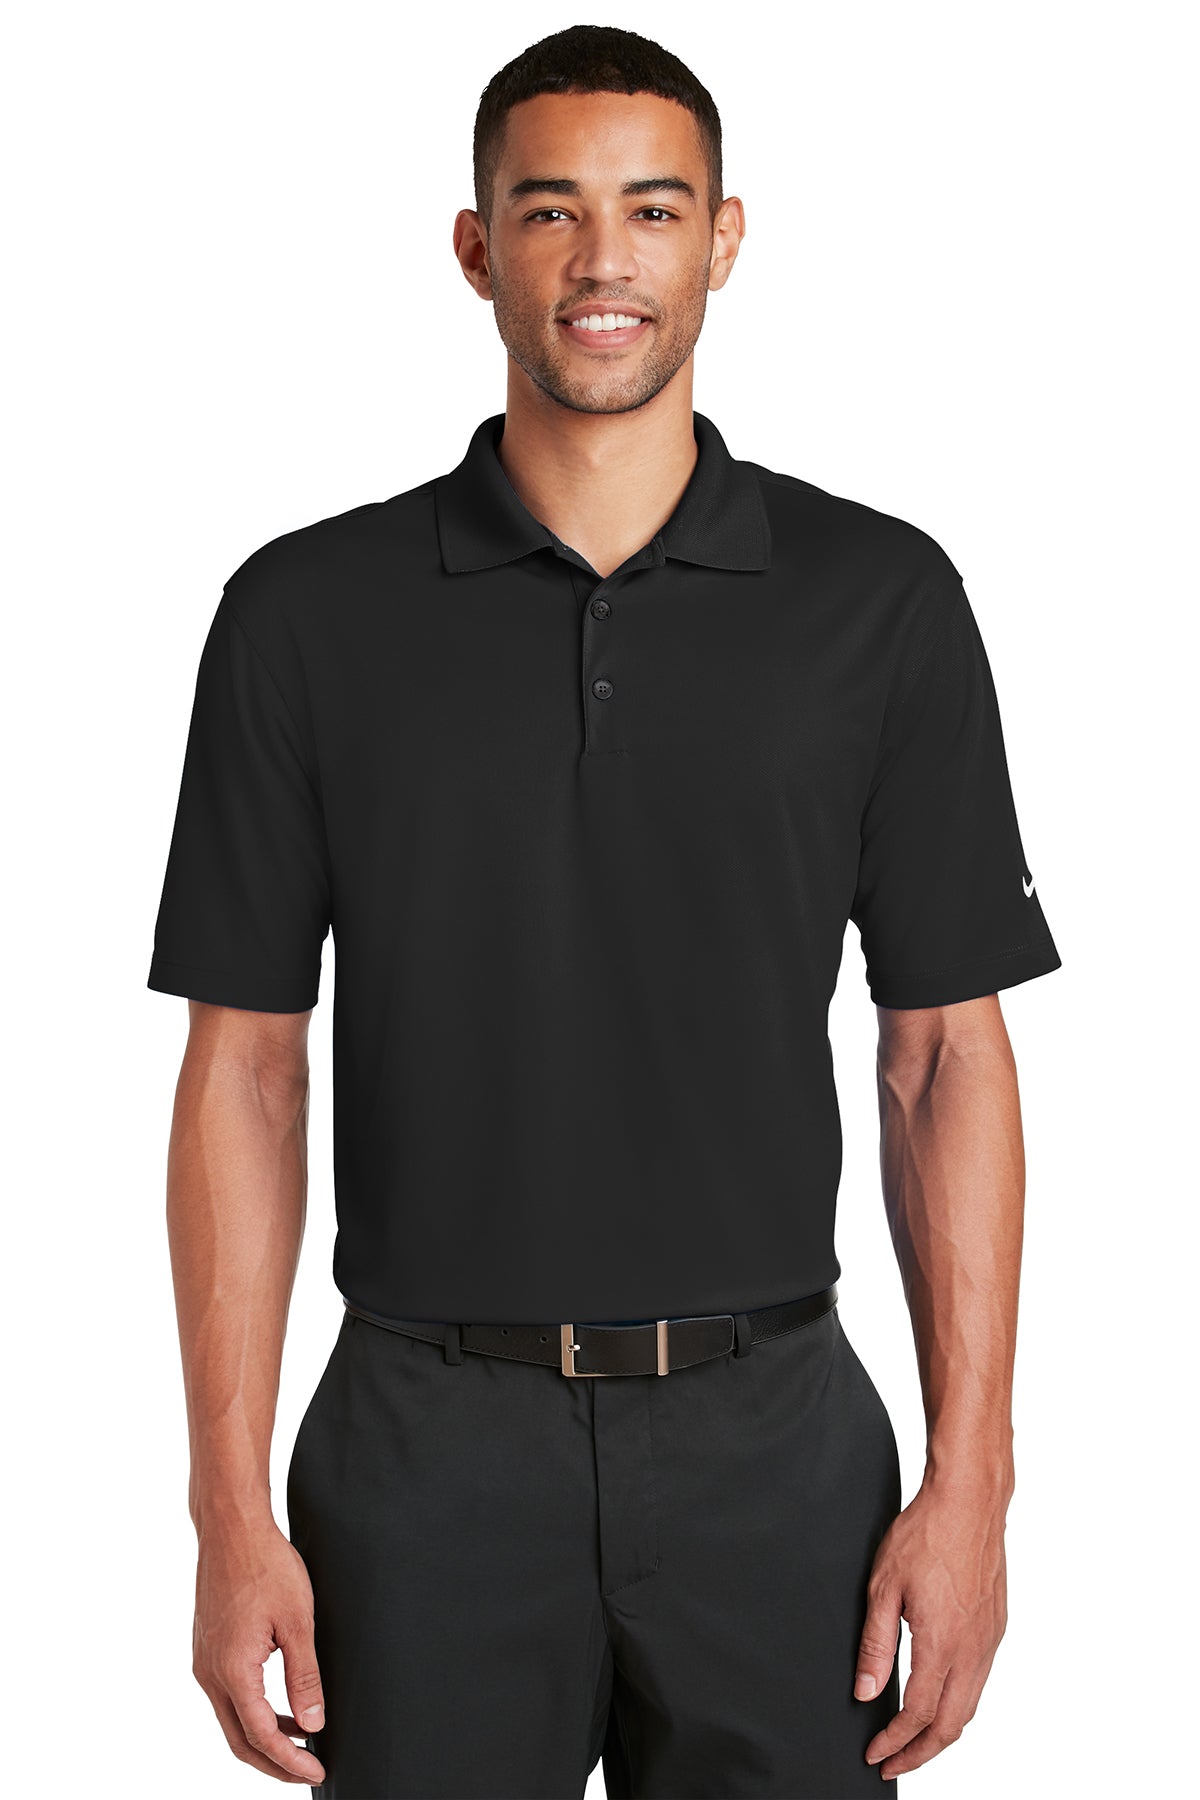 LL Two Oars (Embroidered) Nike Dri-Fit Golf Polo